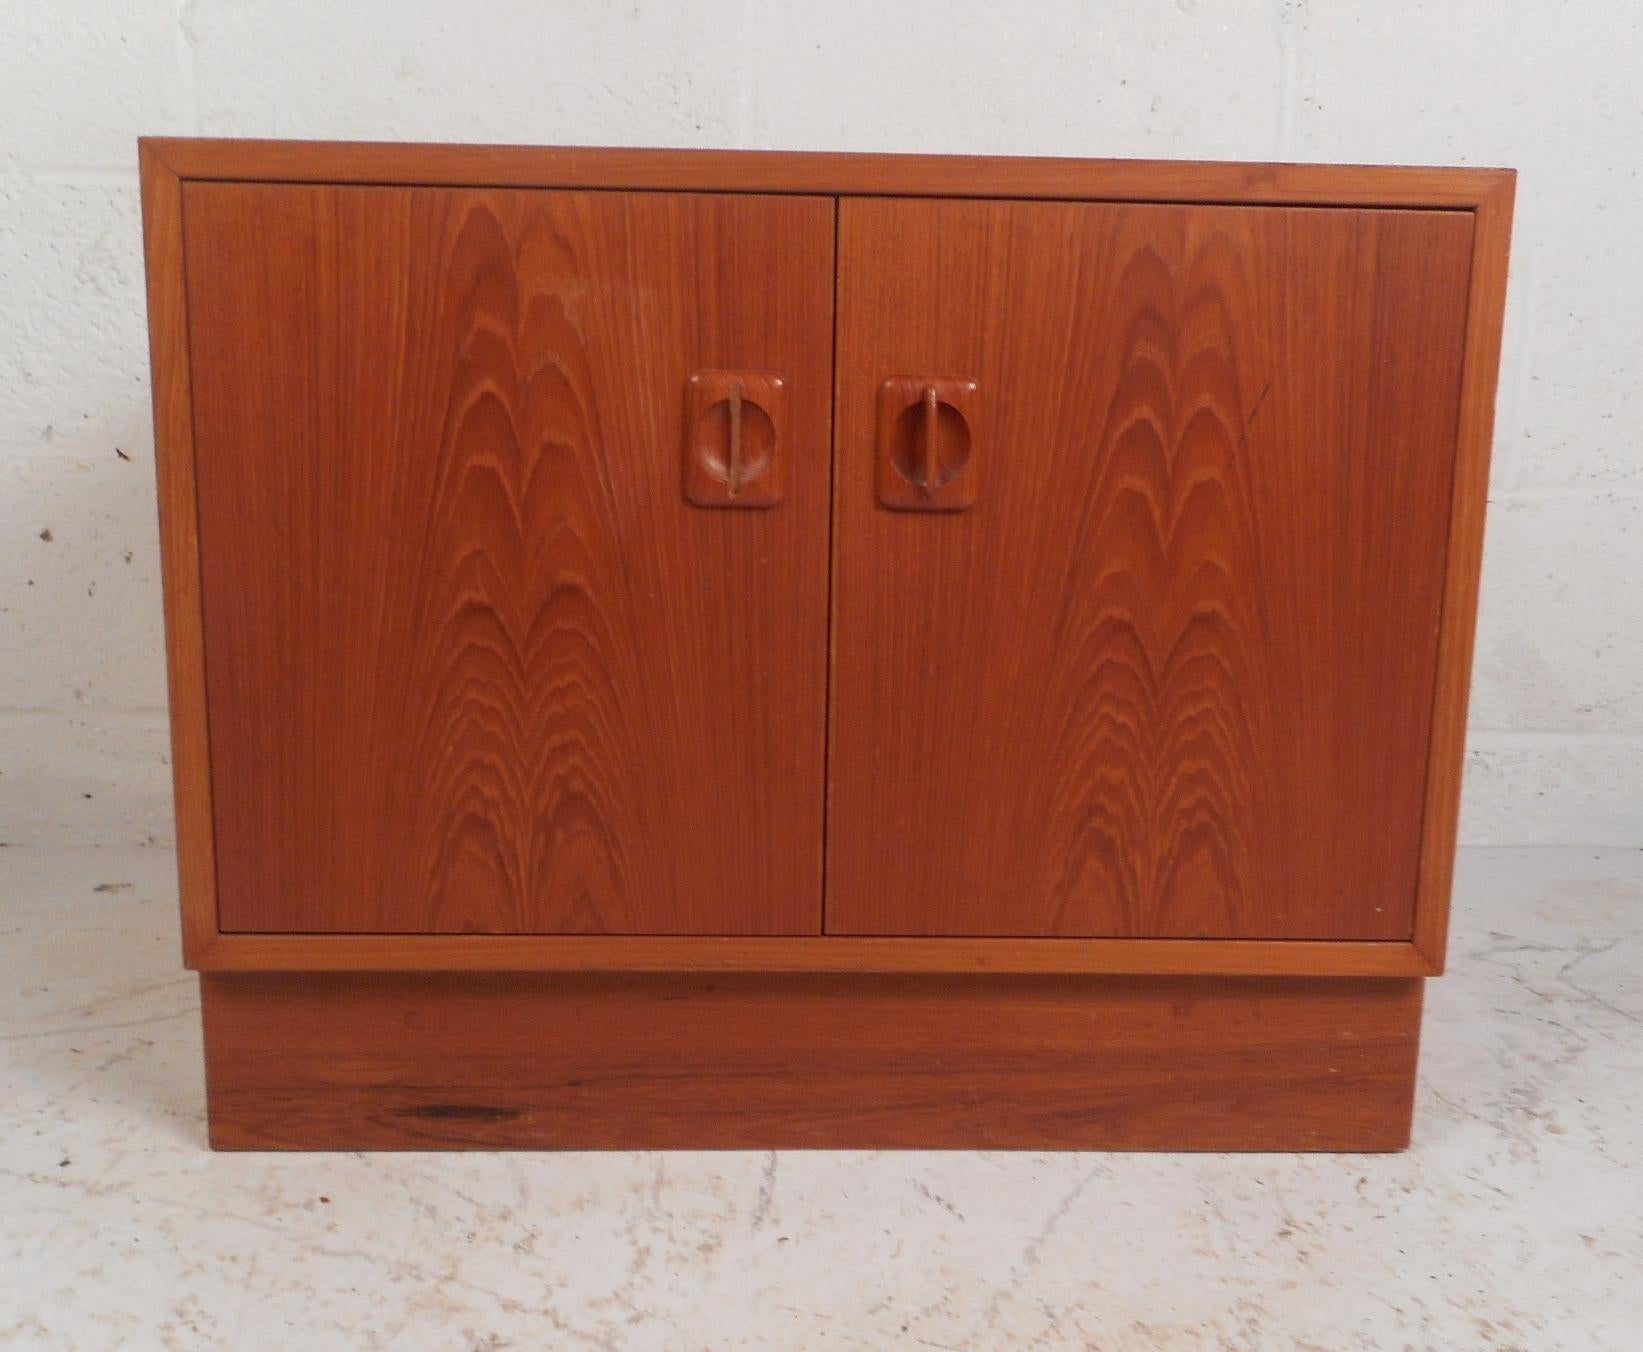 This Mid-Century Modern nightstand features two cabinet doors with carved pulls hiding a large compartment with a shelf. A functional design that works perfectly as an end table or a nightstand for any room in the house. This beautiful teak case